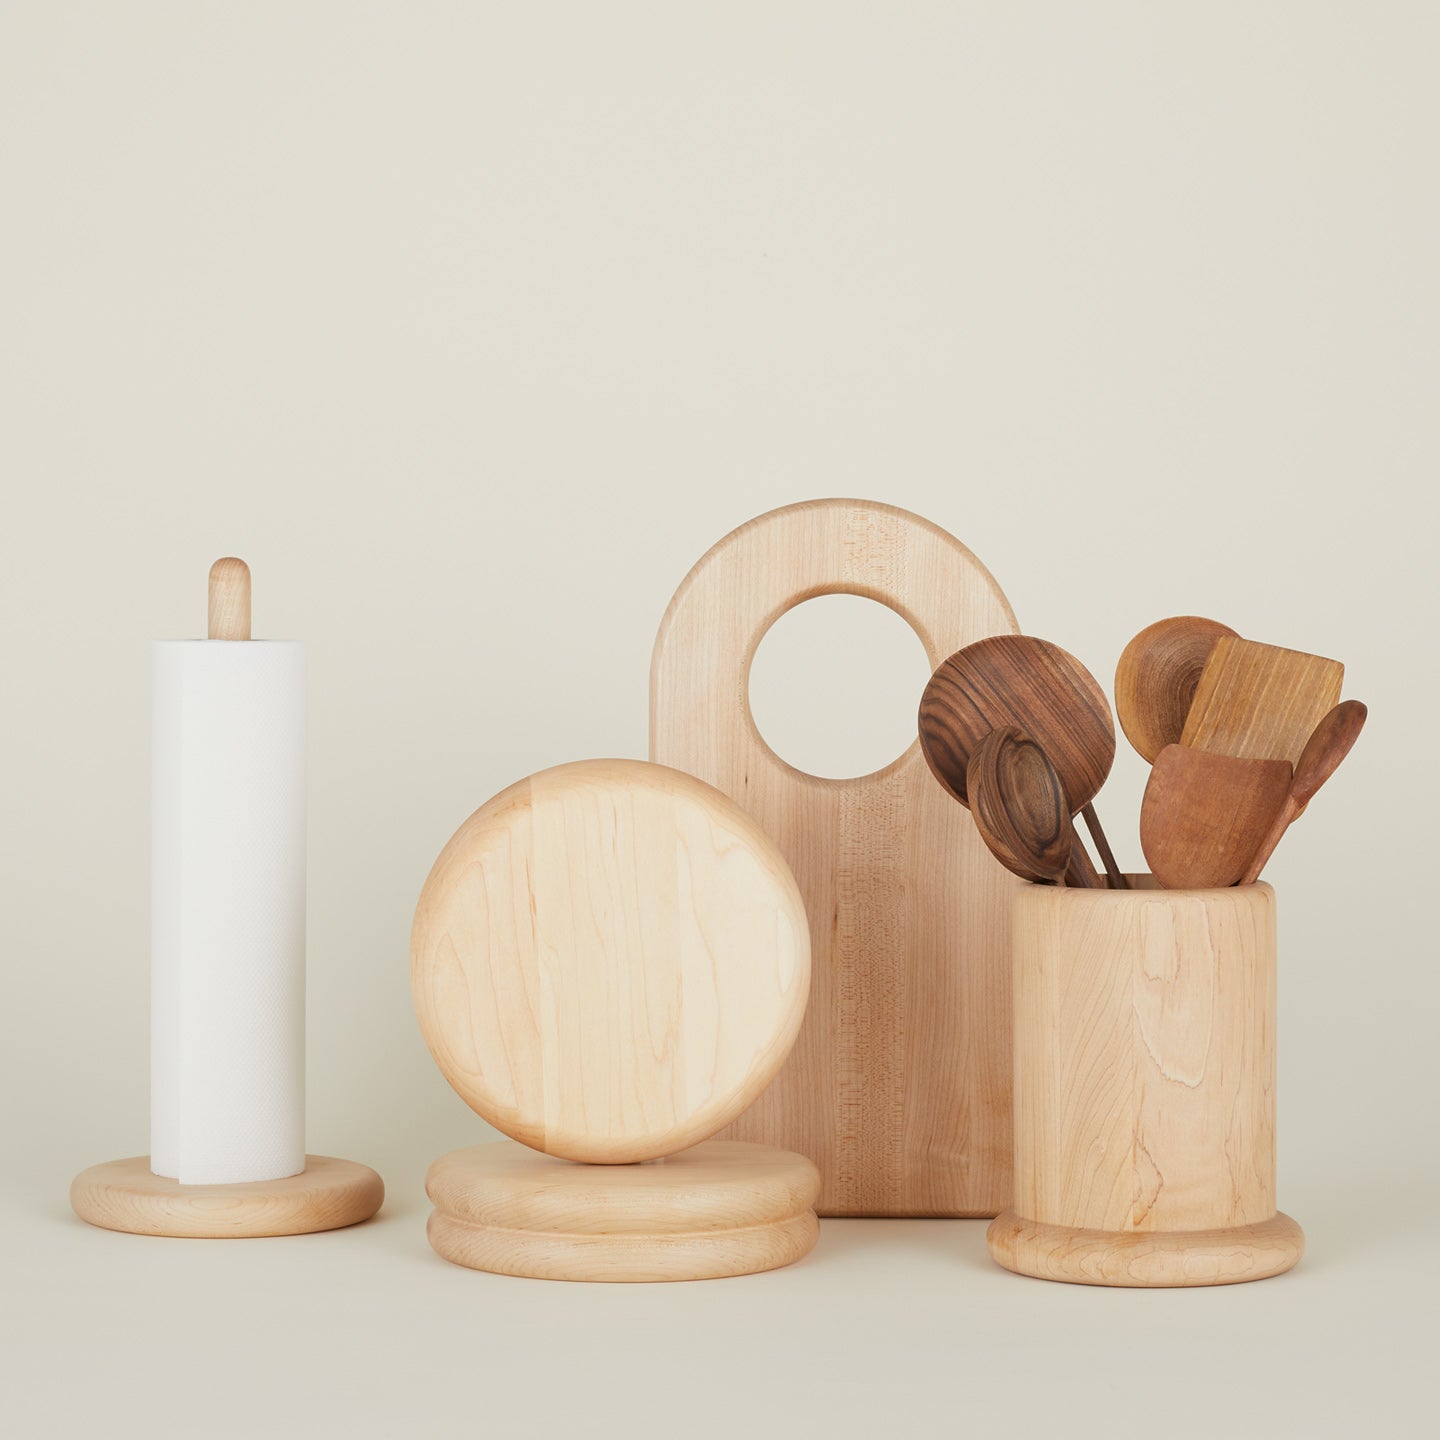 Simple wood collection with paper towel holder cutting boards and utility crock filled with wooden utensils